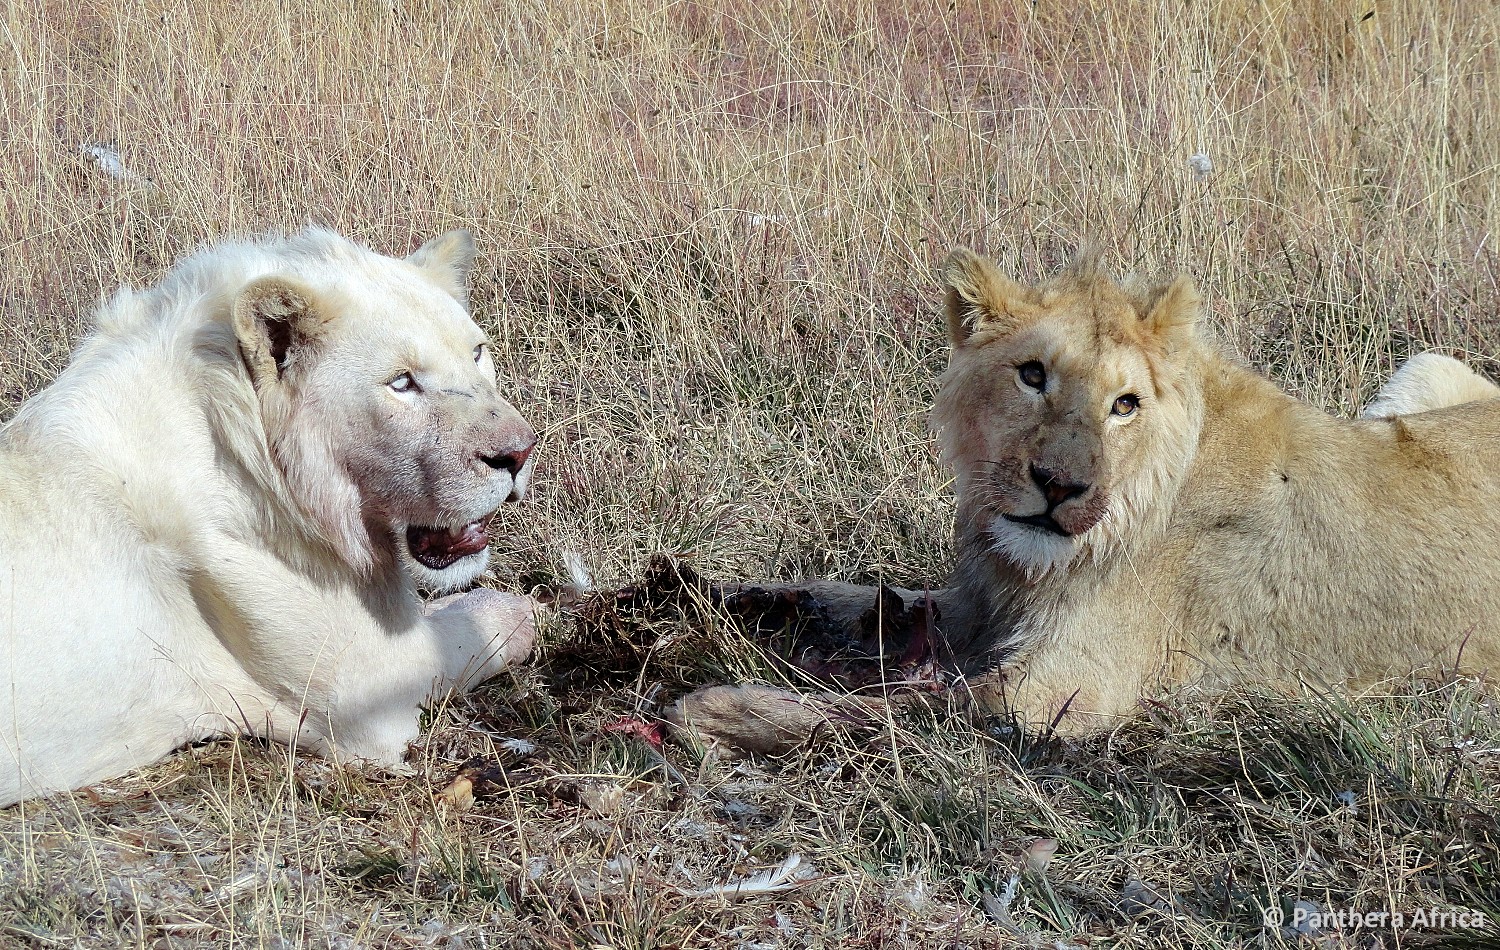 Obi and Oliver shortly after their rescue from lion breeding farm